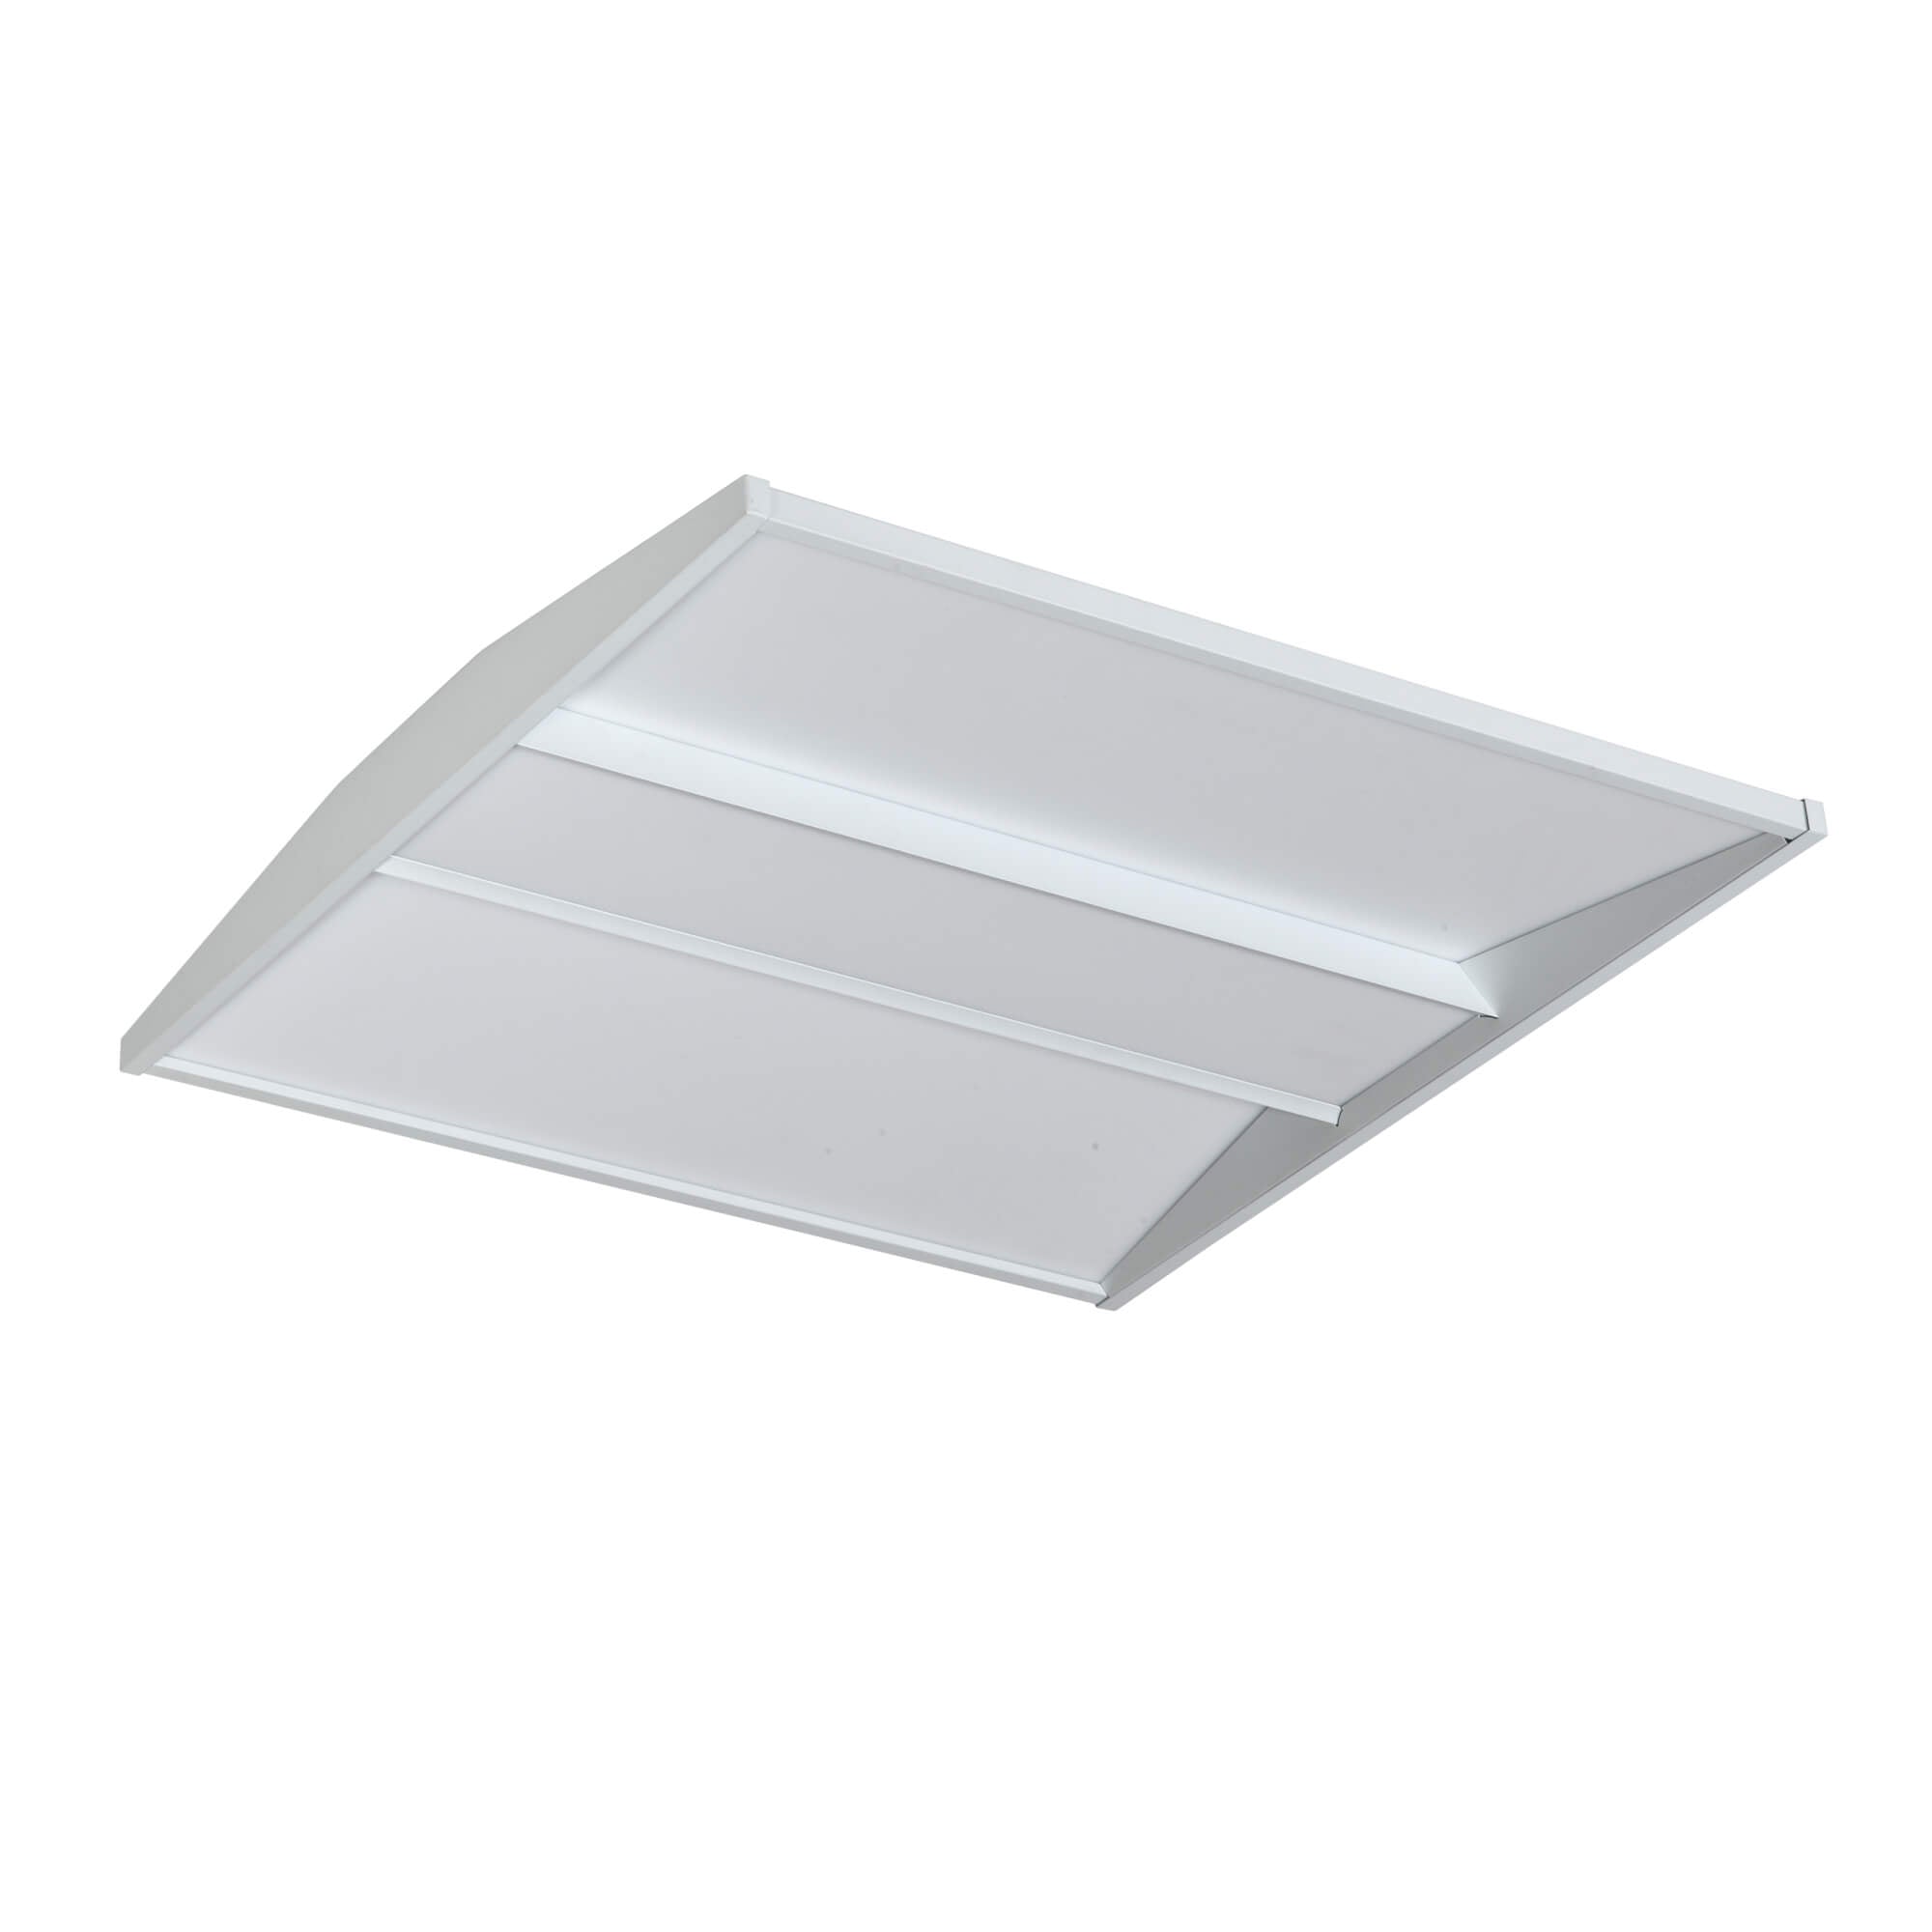 Architectural recessed Halcon Indirect LED Troffer Light E2102 with selectable CCT and wattage for commercial lighting